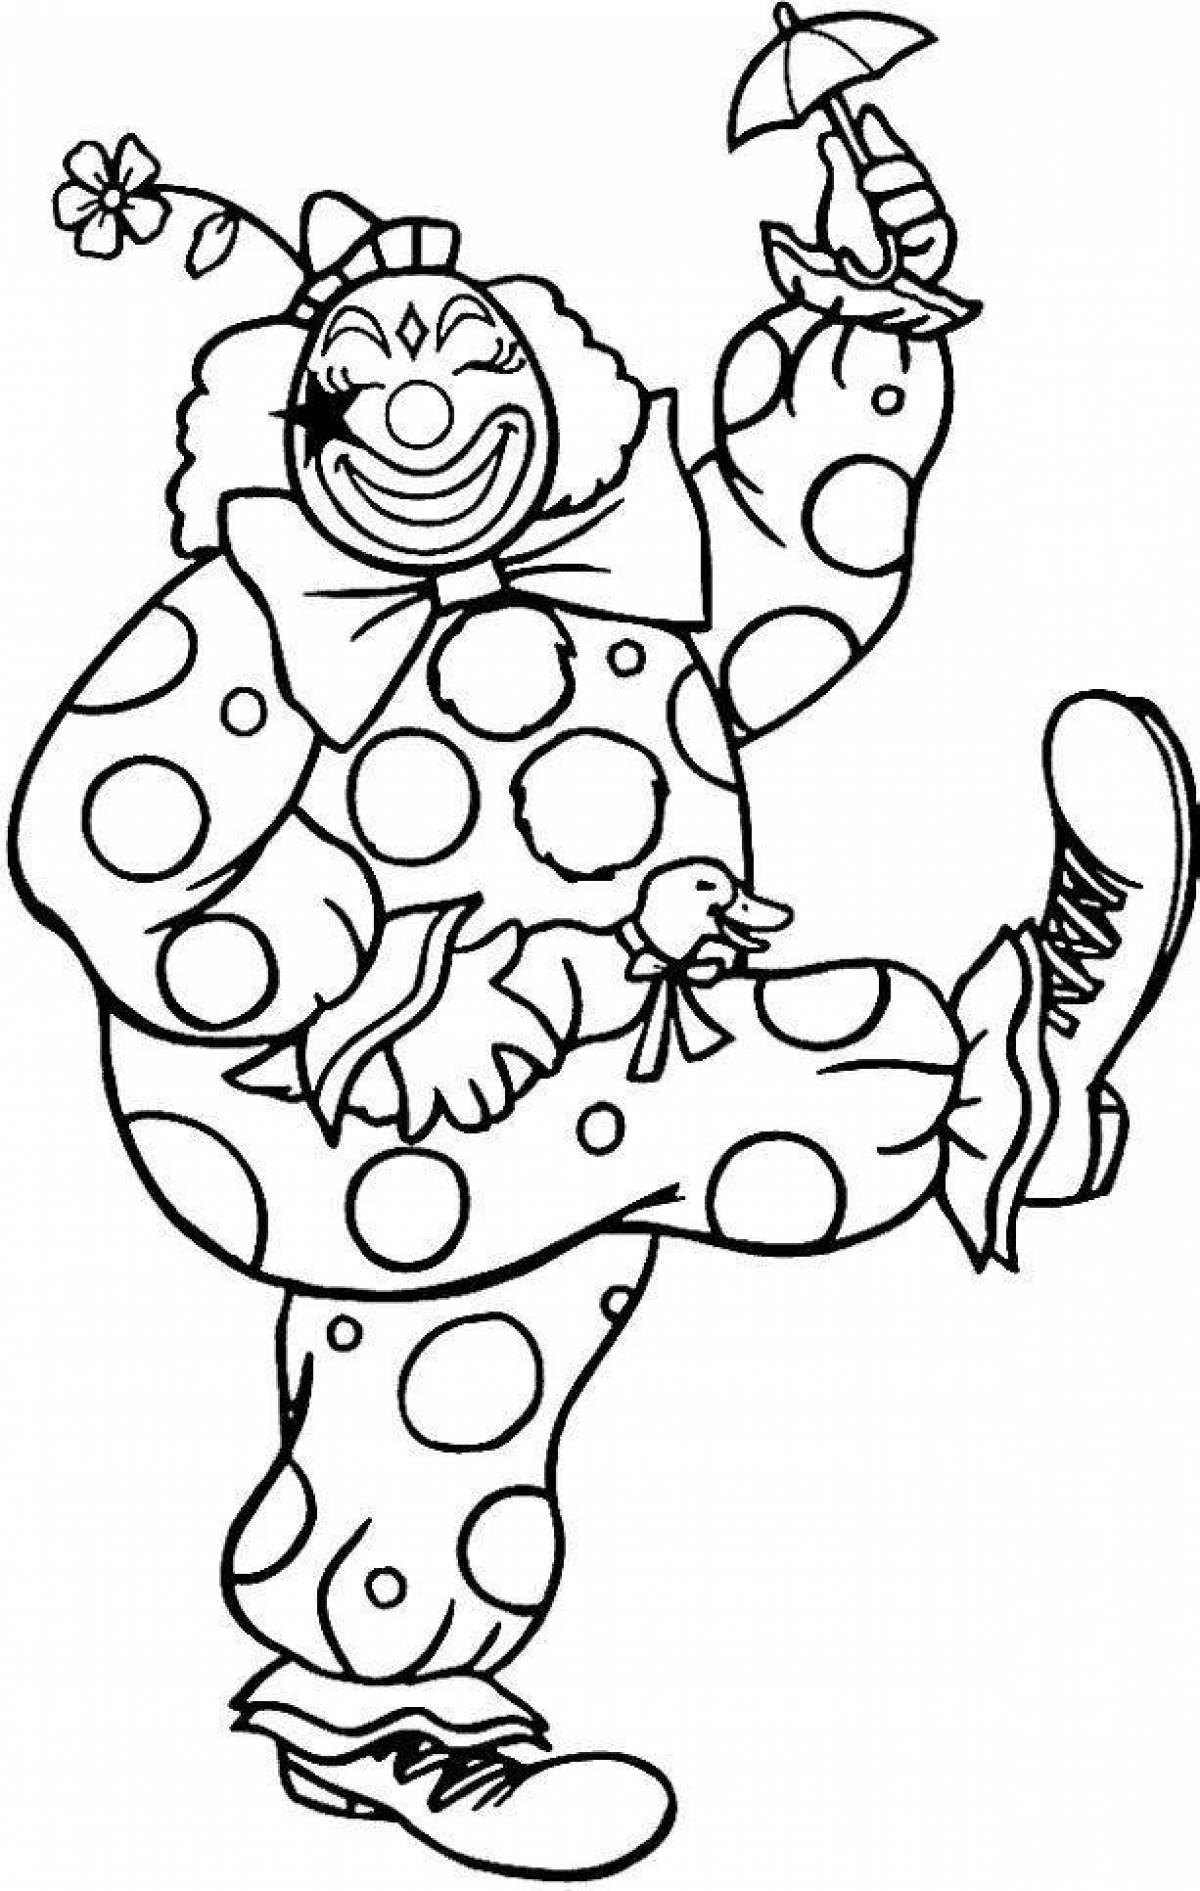 Irreverent funny clown coloring book